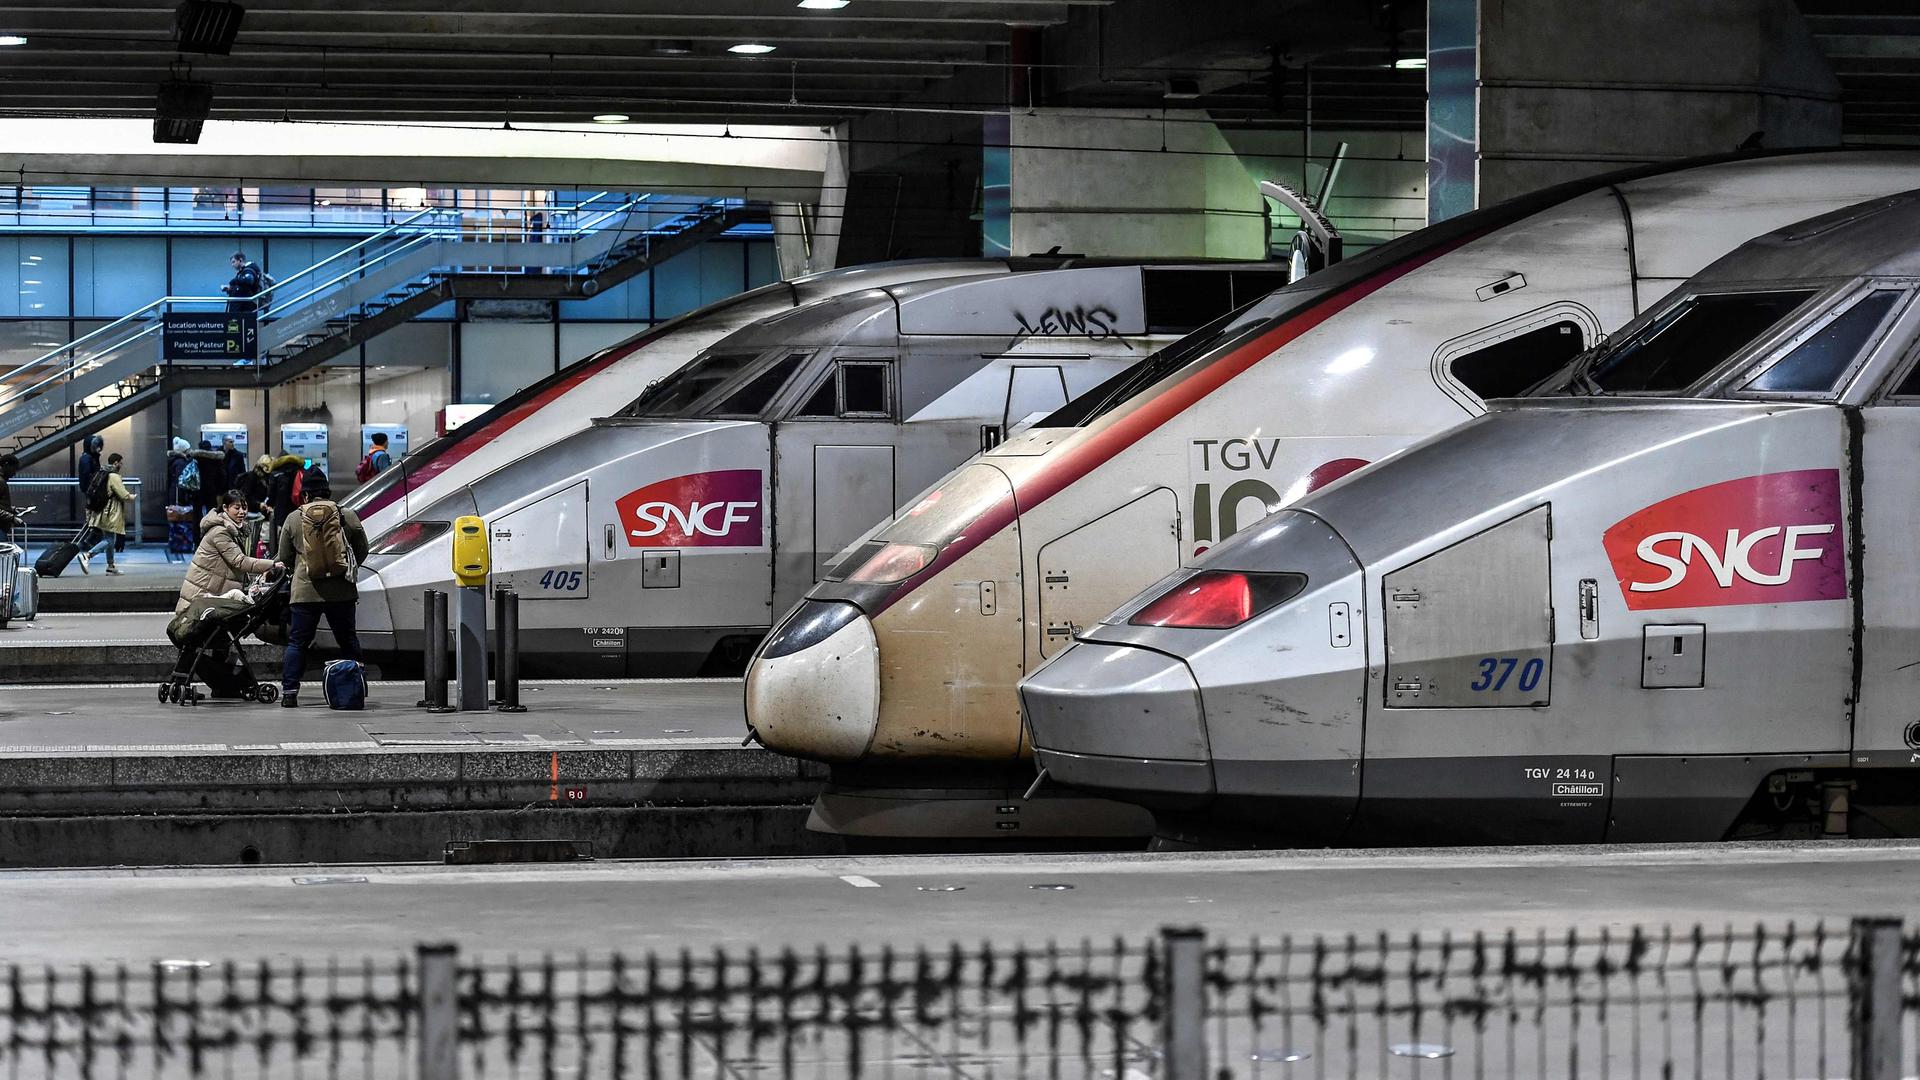 (FILES) In this file photo taken on January 2, 2020 TGV trains of French national railway operator SNCF are seen at Gare Montparnasse train station in Paris on the 29th day of a nationwide multi-sector strike against the government's pensions overhaul. - SNCF announced on February 24, 2021, a net loss of 3 billion euros in 2020. (Photo by STEPHANE DE SAKUTIN / AFP)